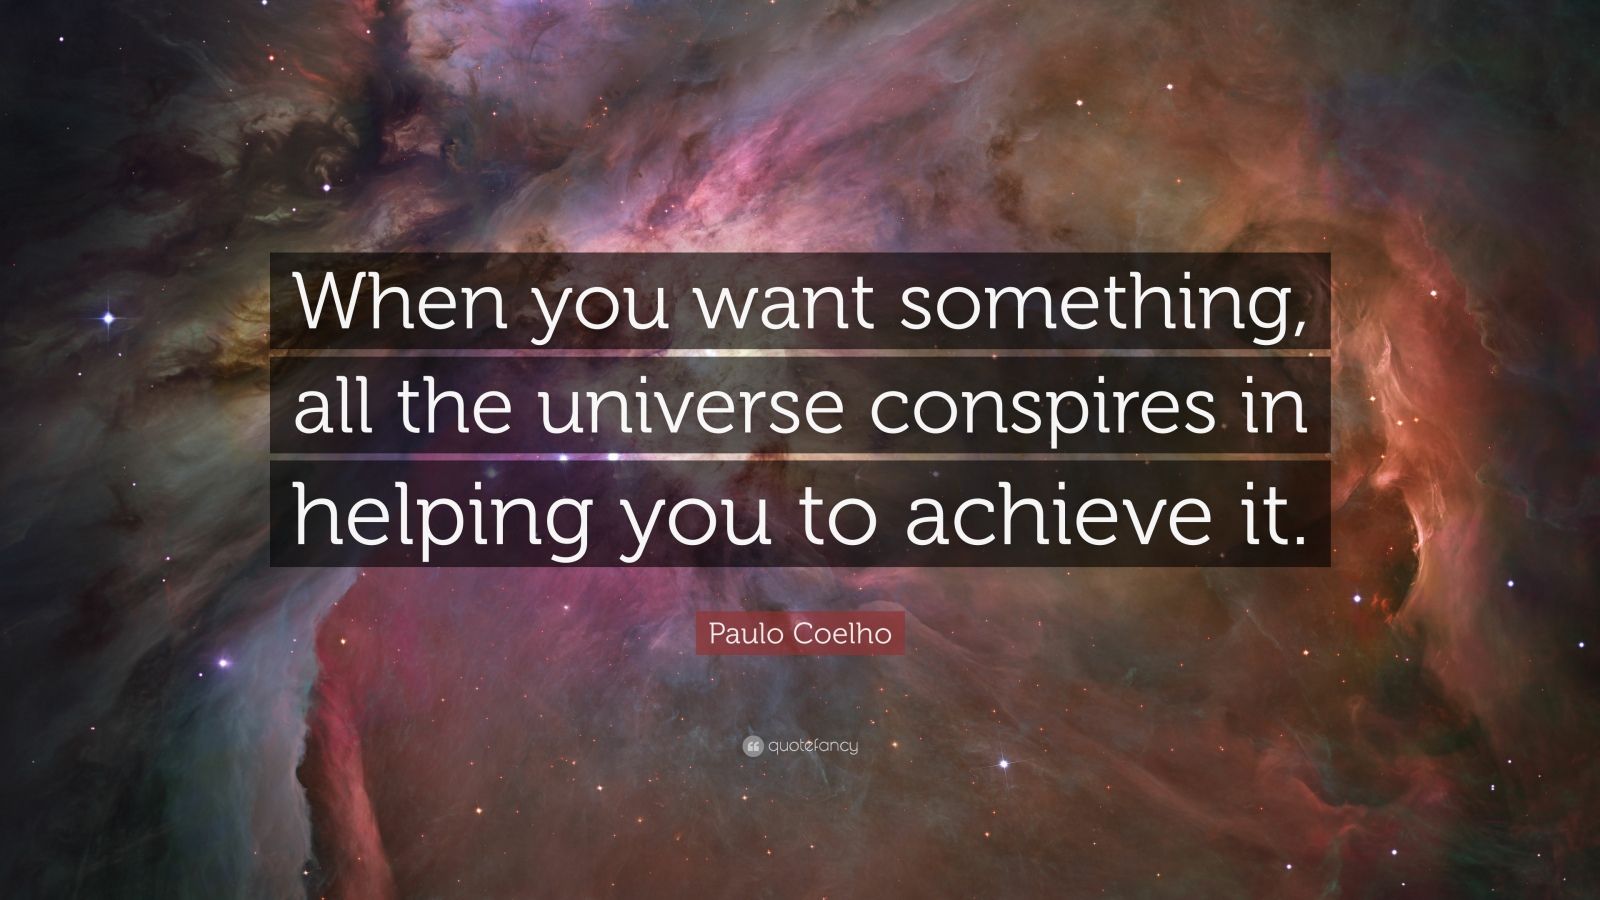 Paulo Coelho Quote: “When you want something, all the universe